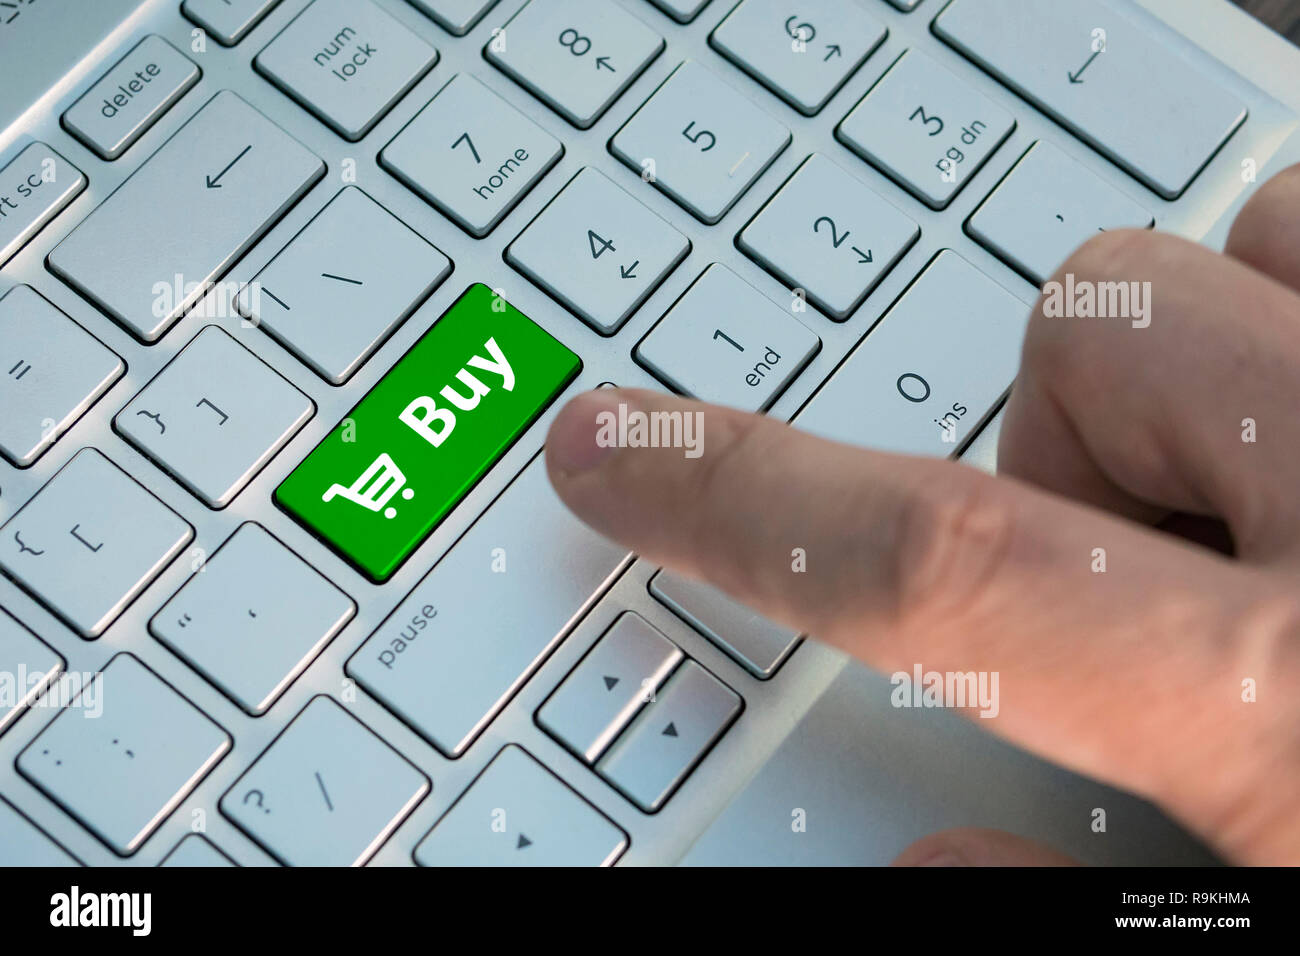 buy button on computer keyboard showing business concept. A male finger presses a color button on a gray silver keyboard of a modern laptop. Button wi Stock Photo